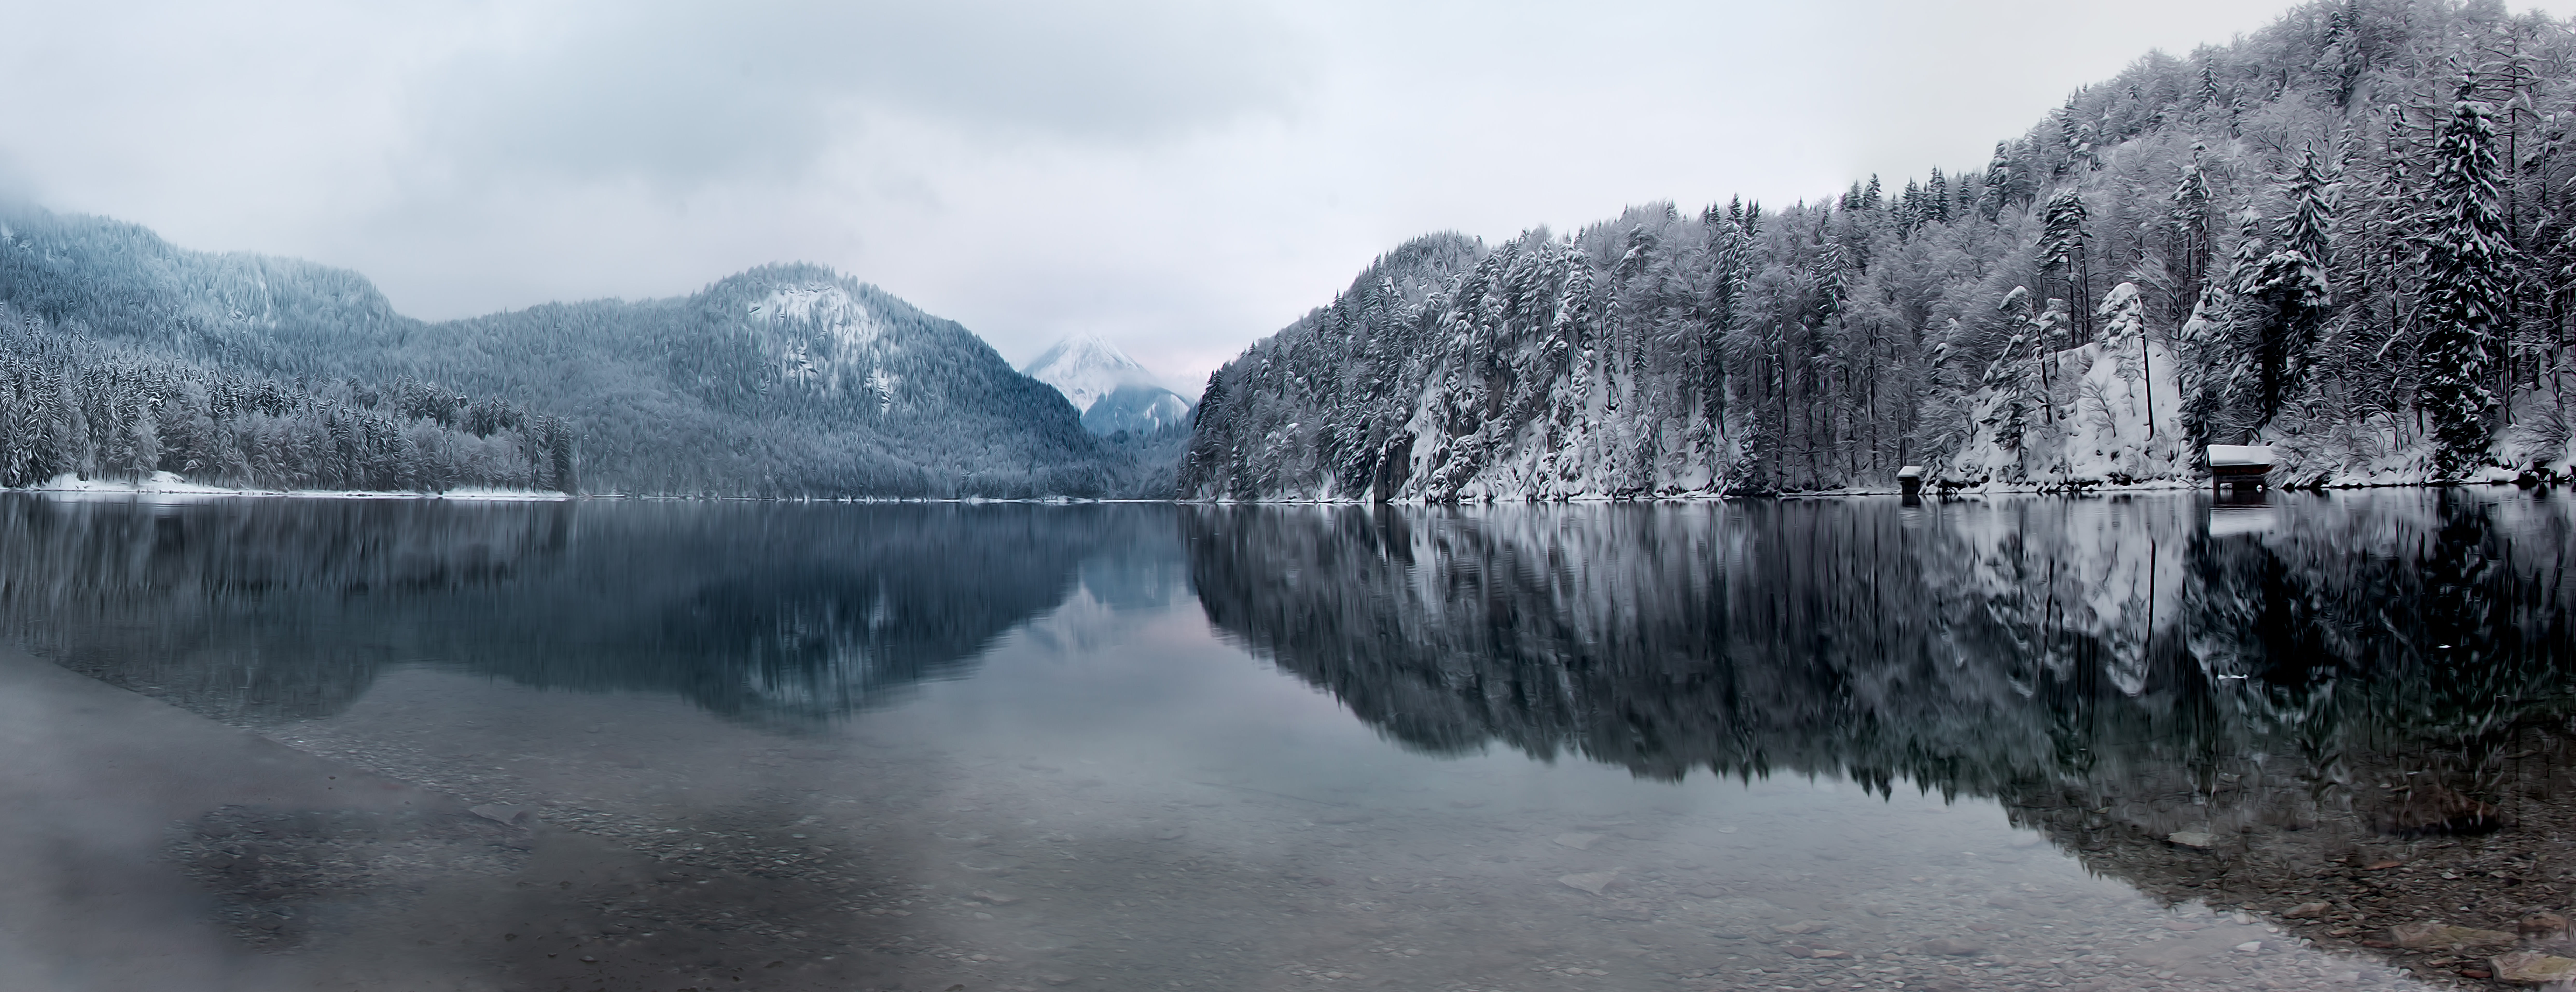 body of water surrounded with mountains, alpsee, alpsee, Der